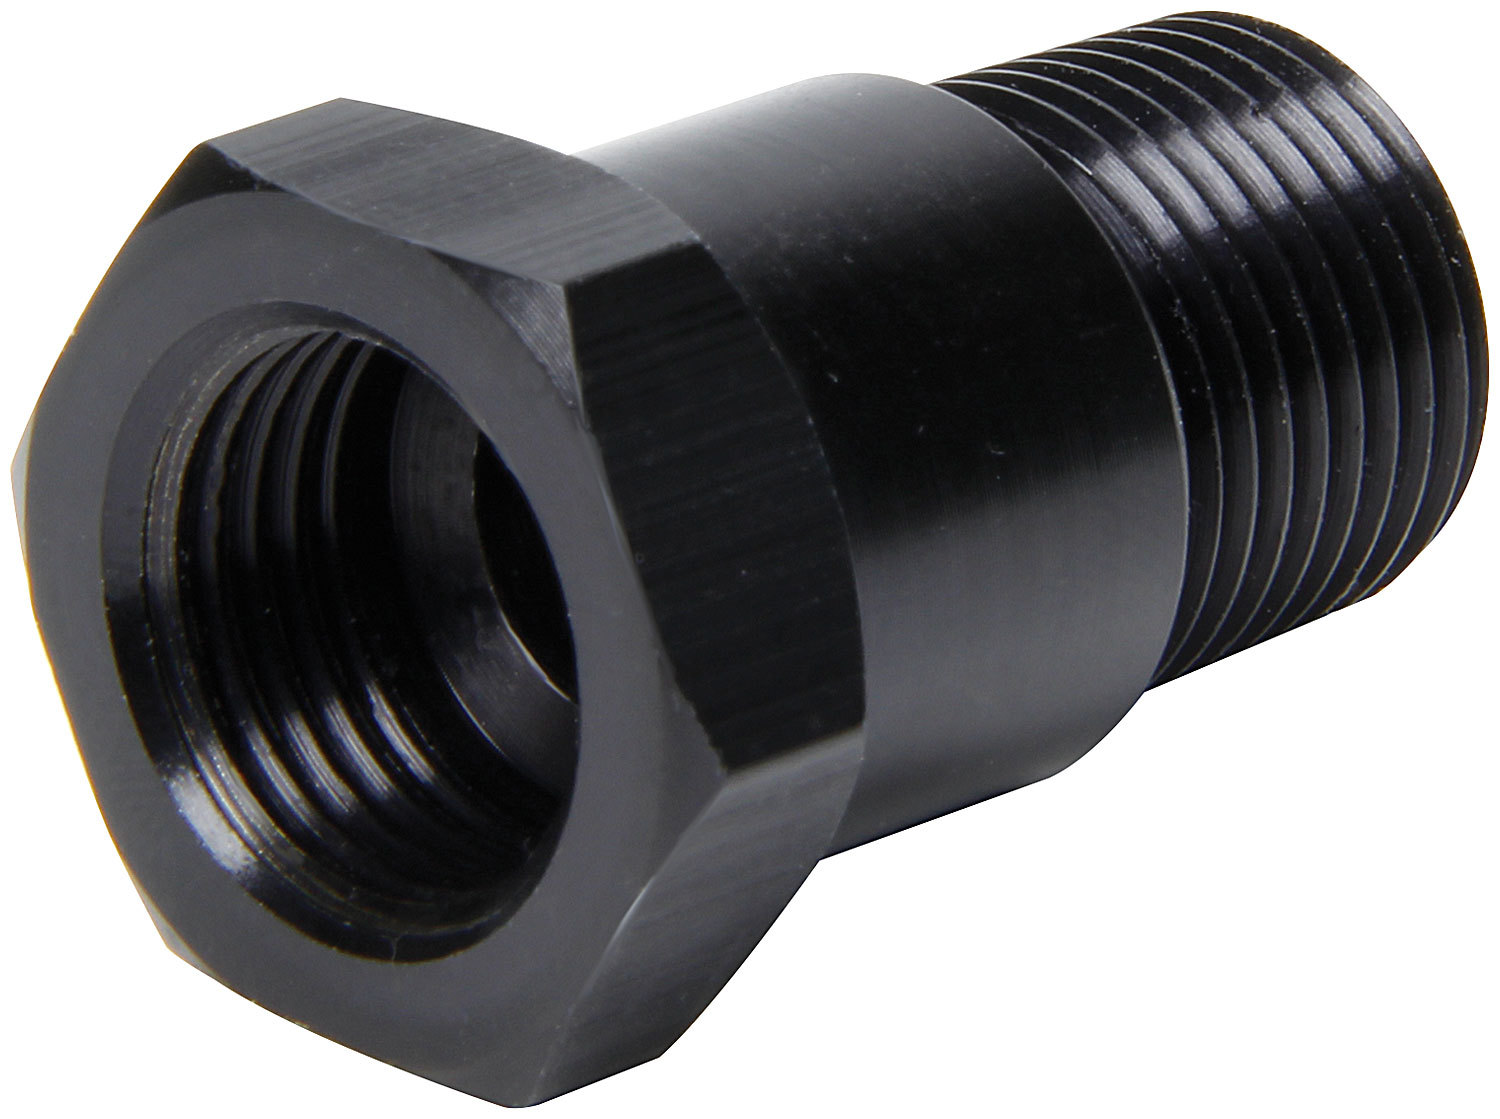 Ti22 Performance 5090 Fitting, Adapter, Straight, 5/8-18 in Female to 3/8 in NPT Male, Aluminum, Black Anodized, Mechanical Temperature Gauges, Each